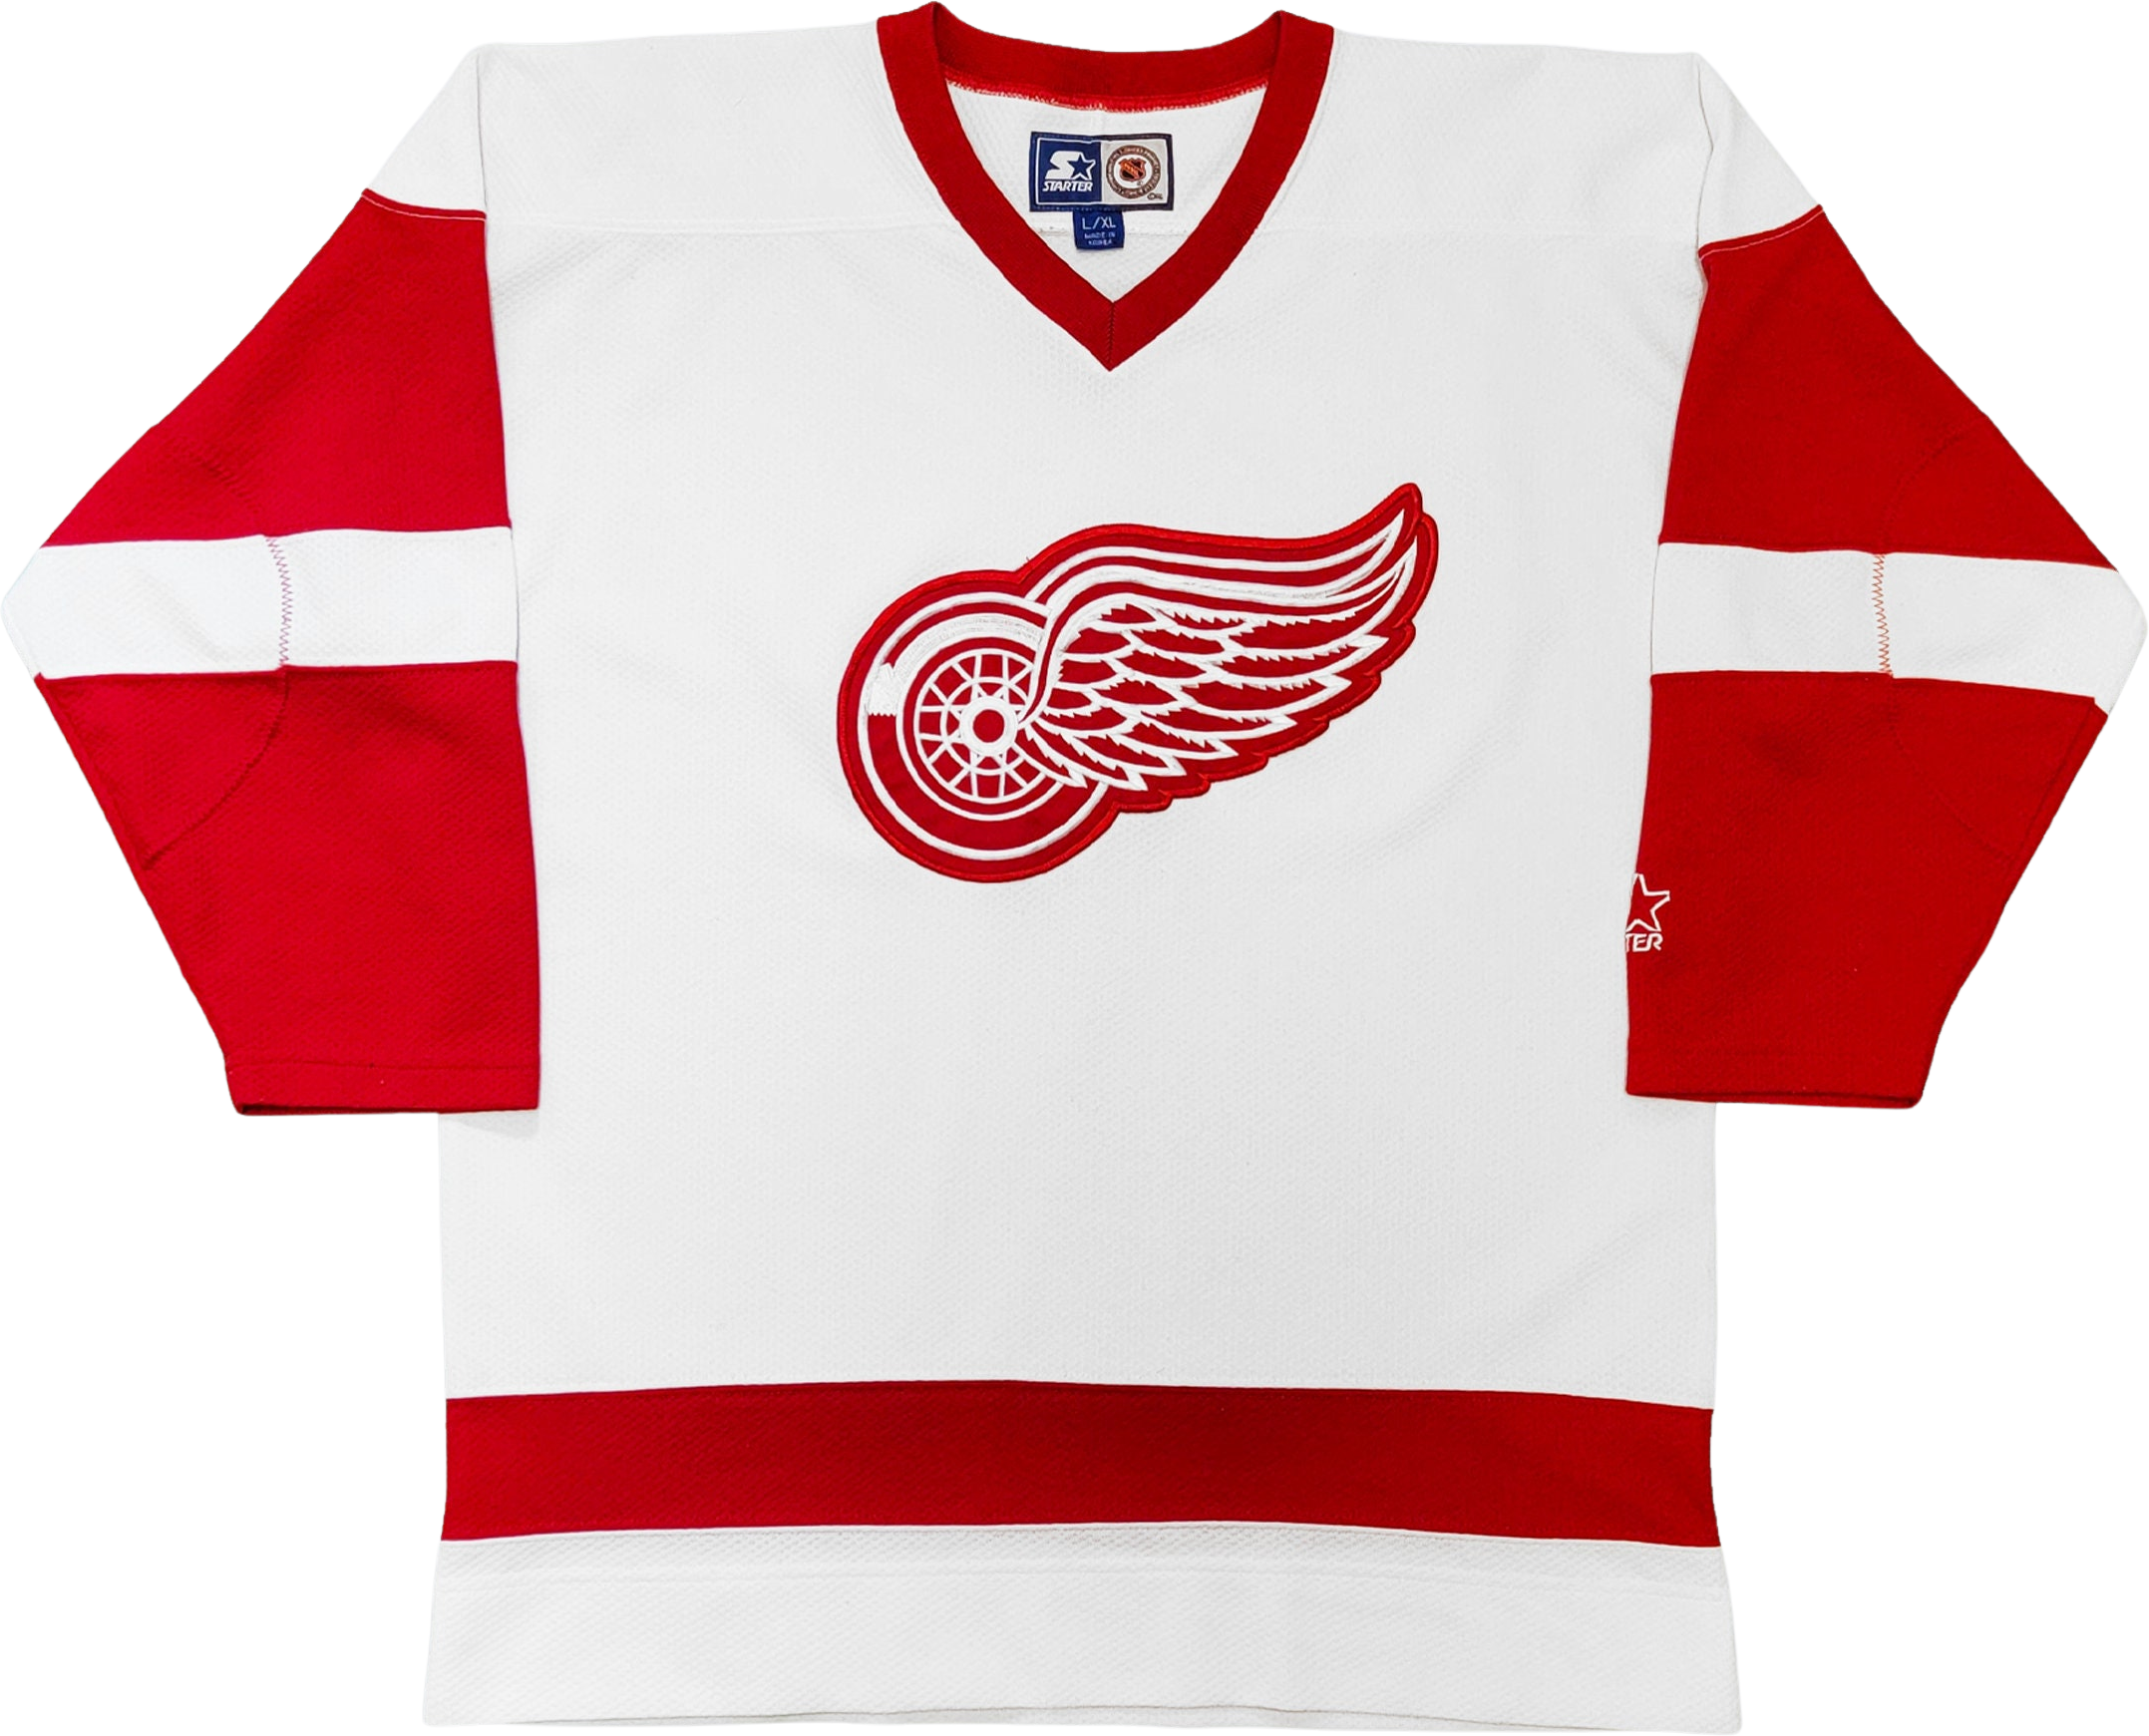 Detroit Red Wings Hockey Team Jacket from the 1990s - clothing &  accessories - by owner - apparel sale - craigslist